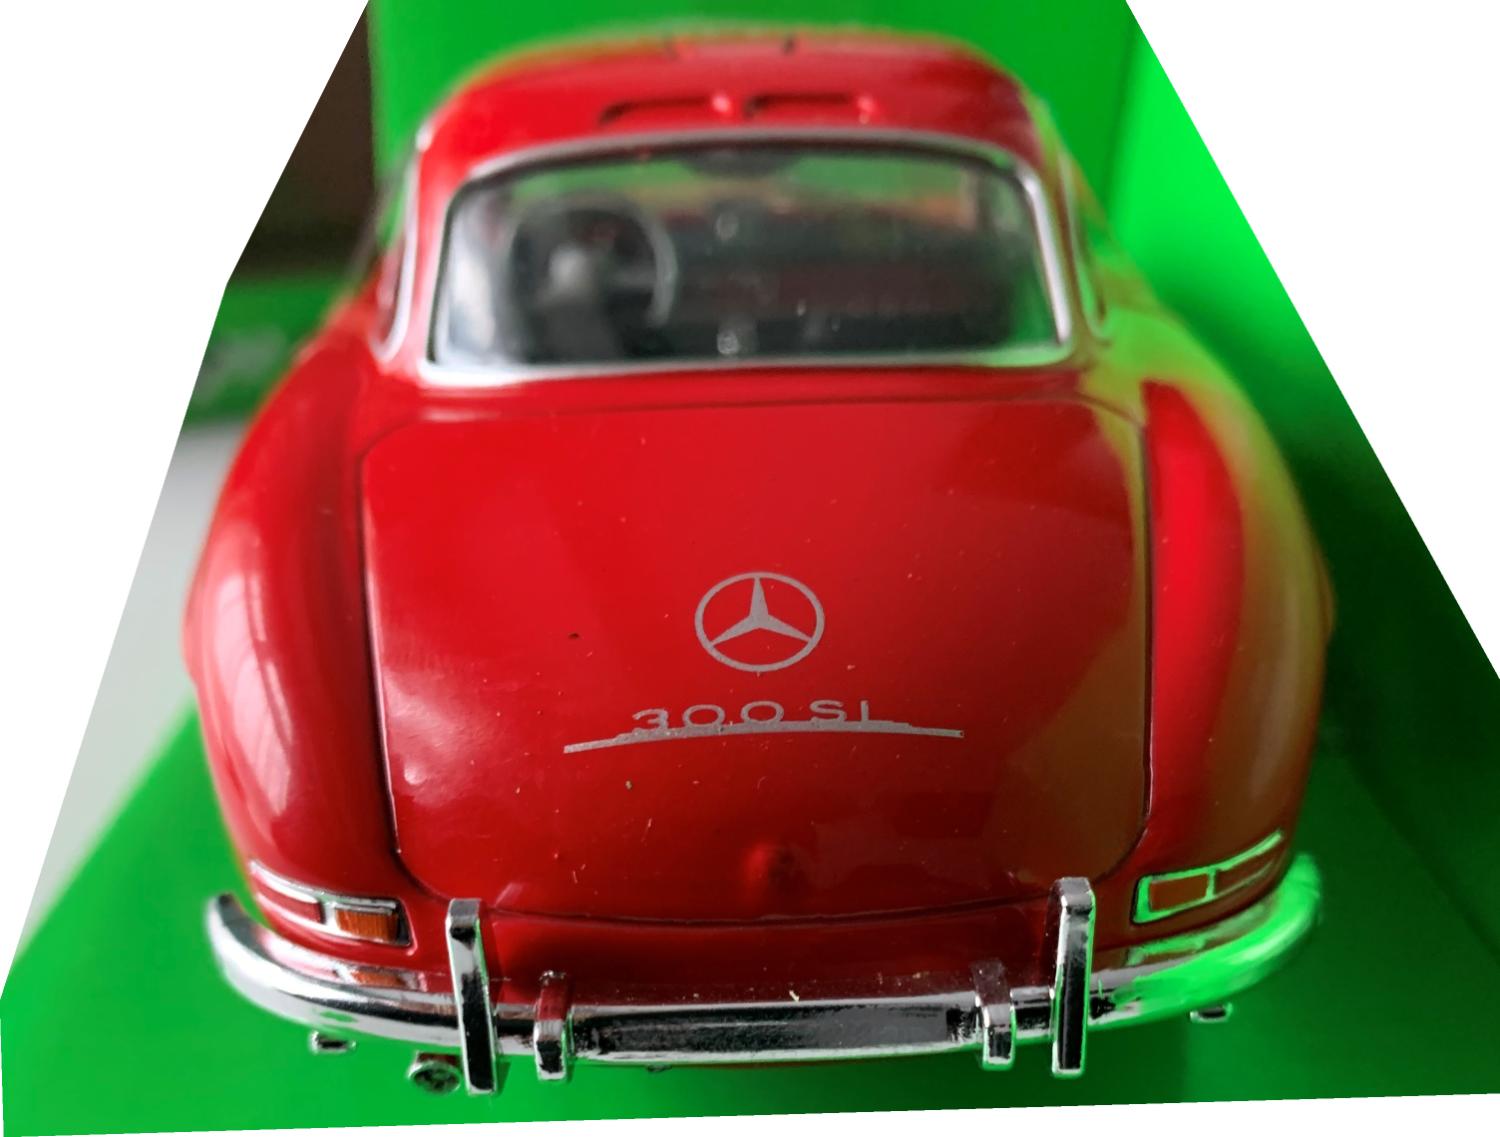 WELLY MERCEDES-BENZ SLS AMG RED 1:24 DIE CAST METAL MODEL NEW IN BOX 18cm 